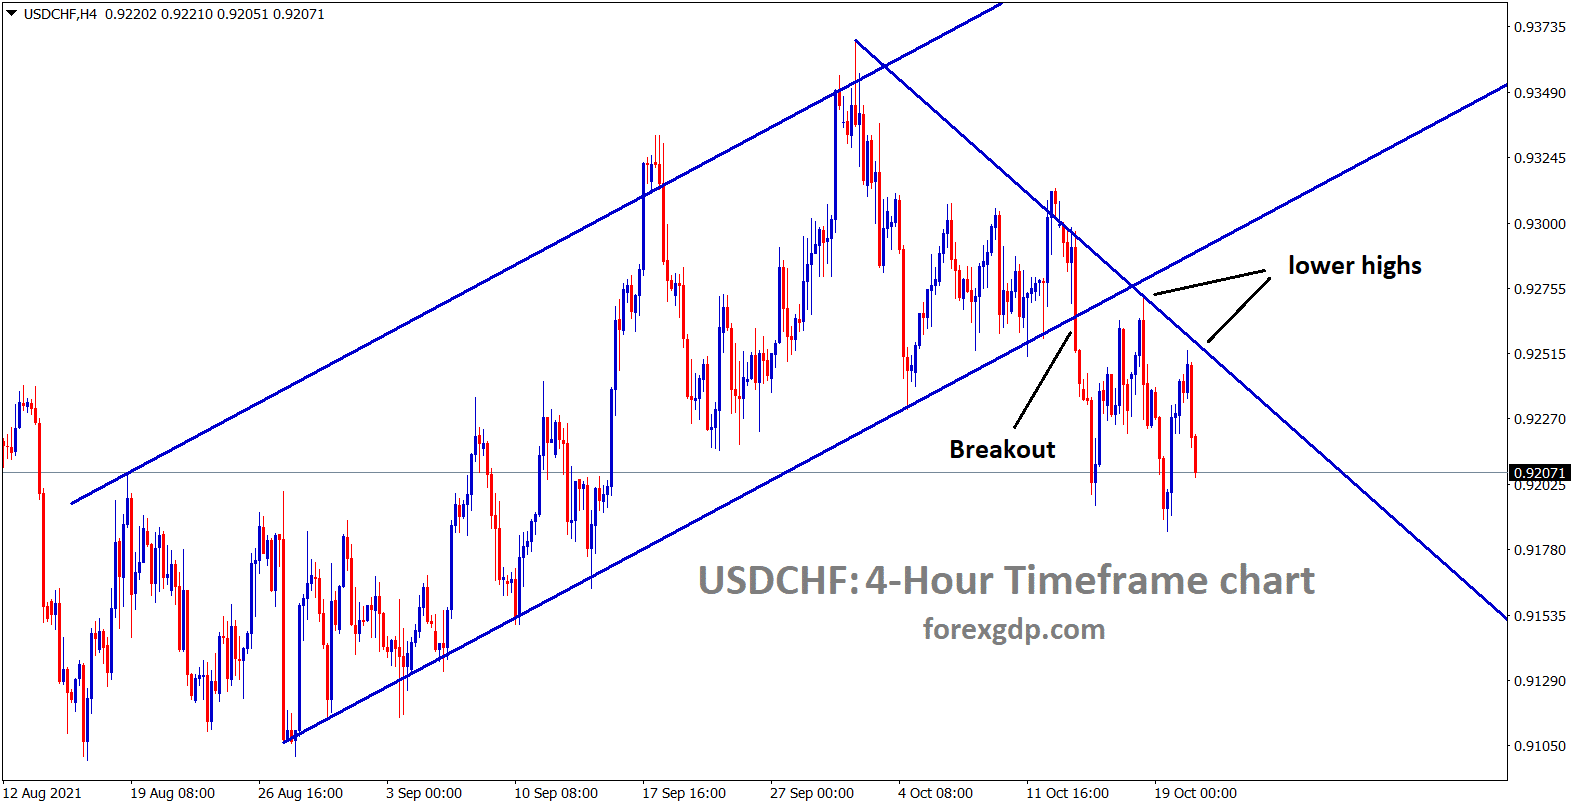 USDCHF is falling down creating continuous lower highs after breaking the Ascending channel range